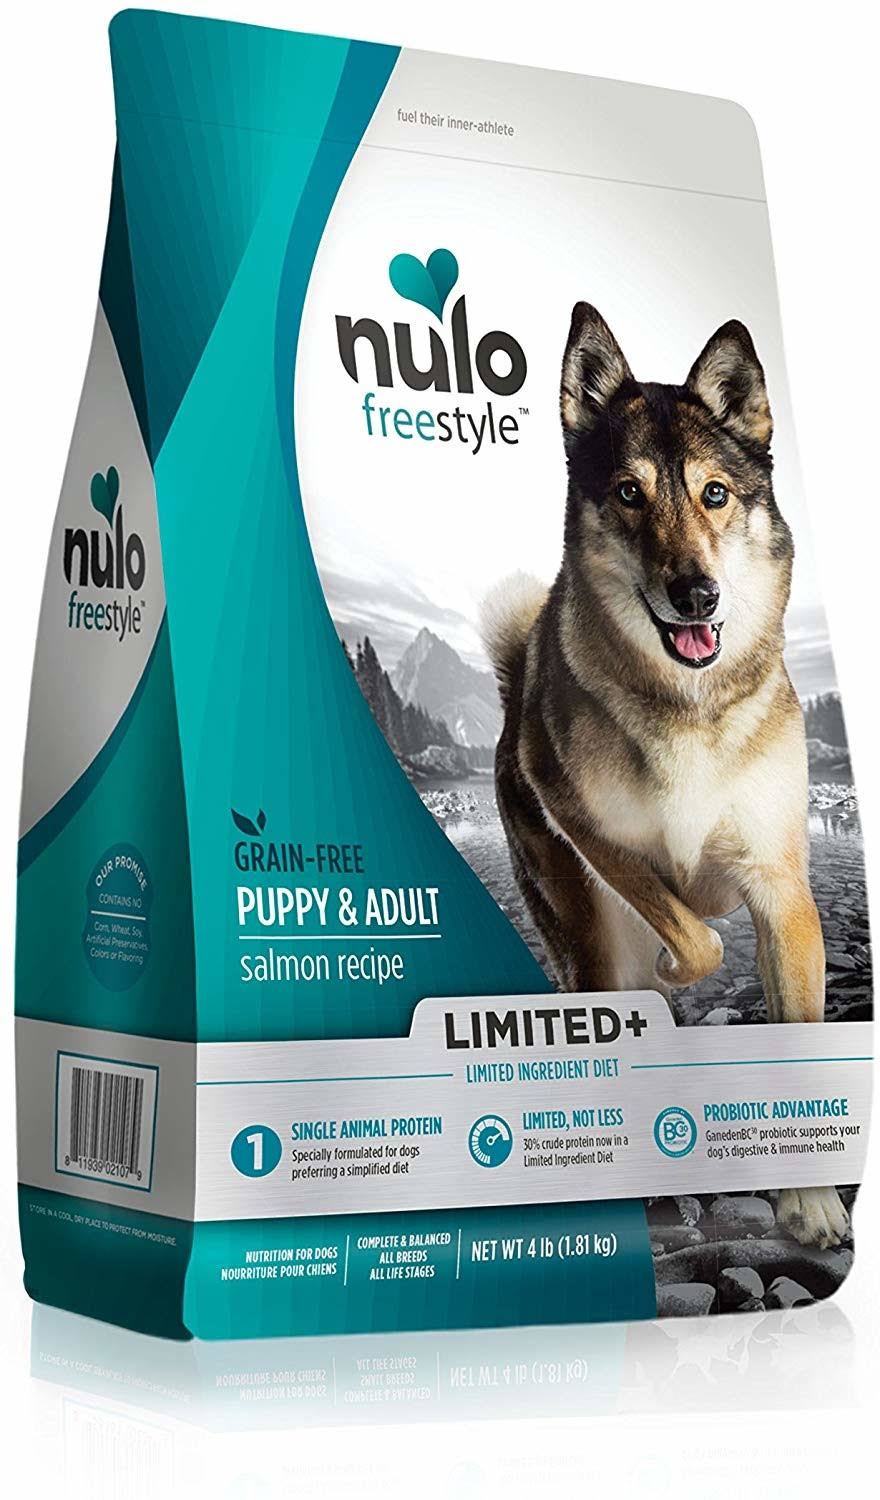 Nulo Freestyle Limited+ Grain Free Salmon Dry Dog Food, 4 lbs